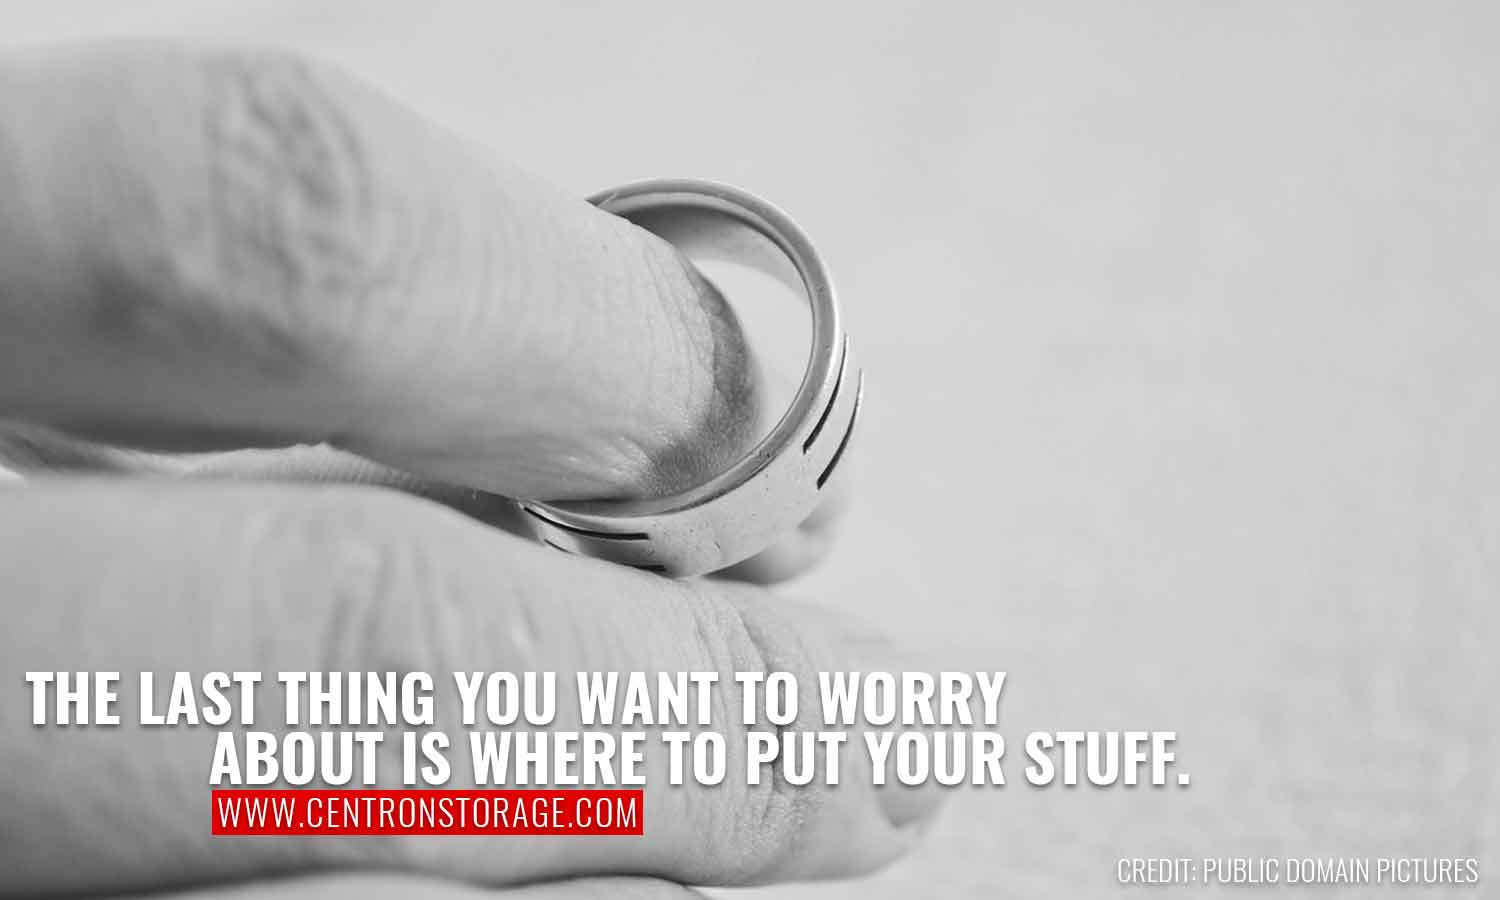 The last thing you want to worry about is where to put your stuff.